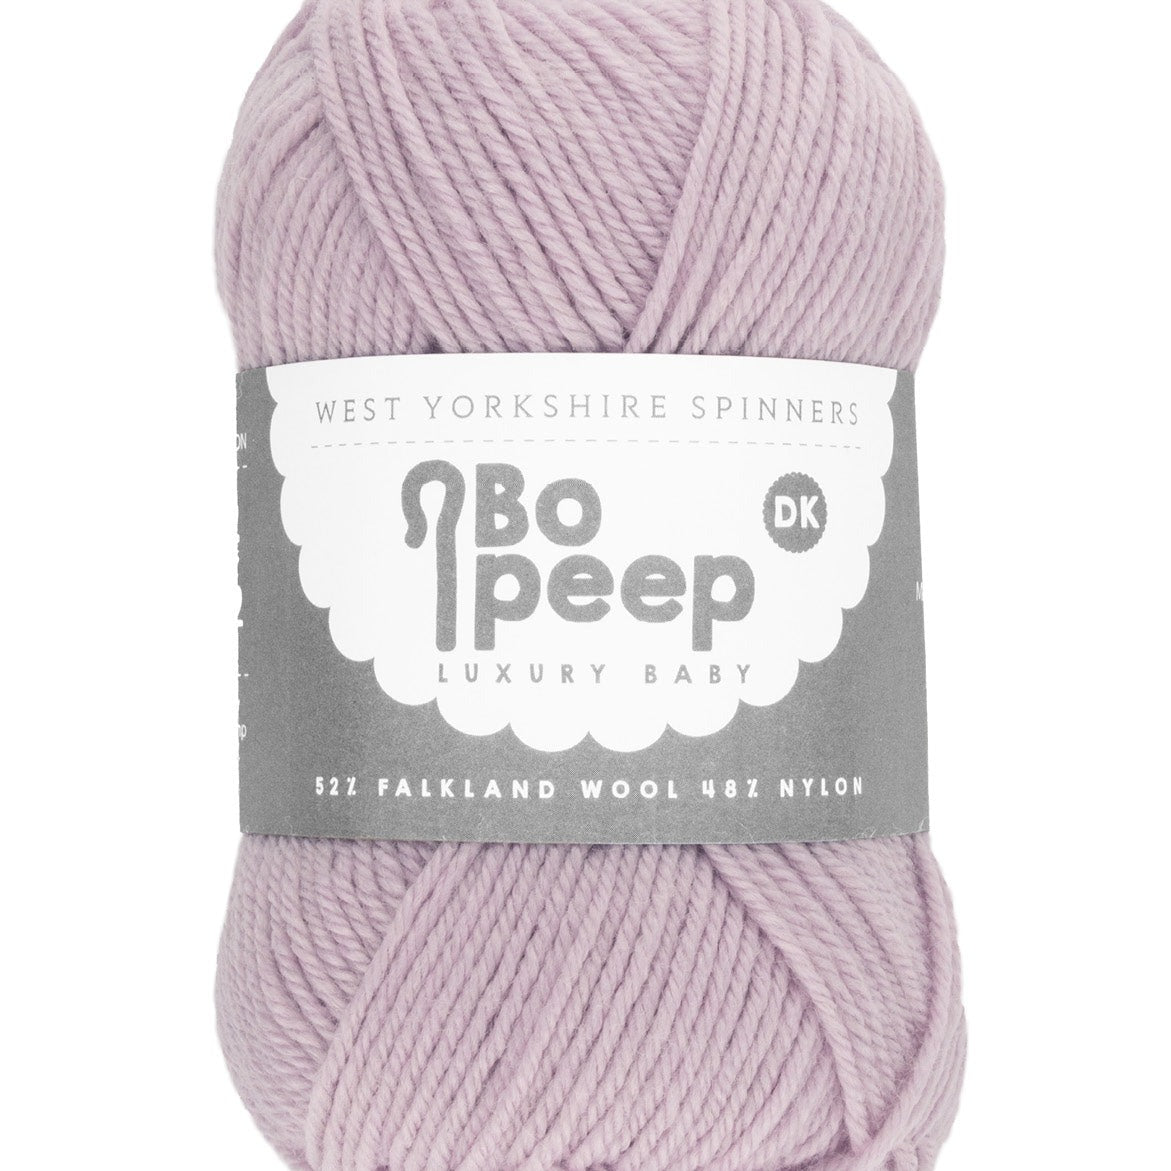 WYS Jack: Textured Jumpers in Bo Peep DK by Sarah Hatton - Knitting Kit